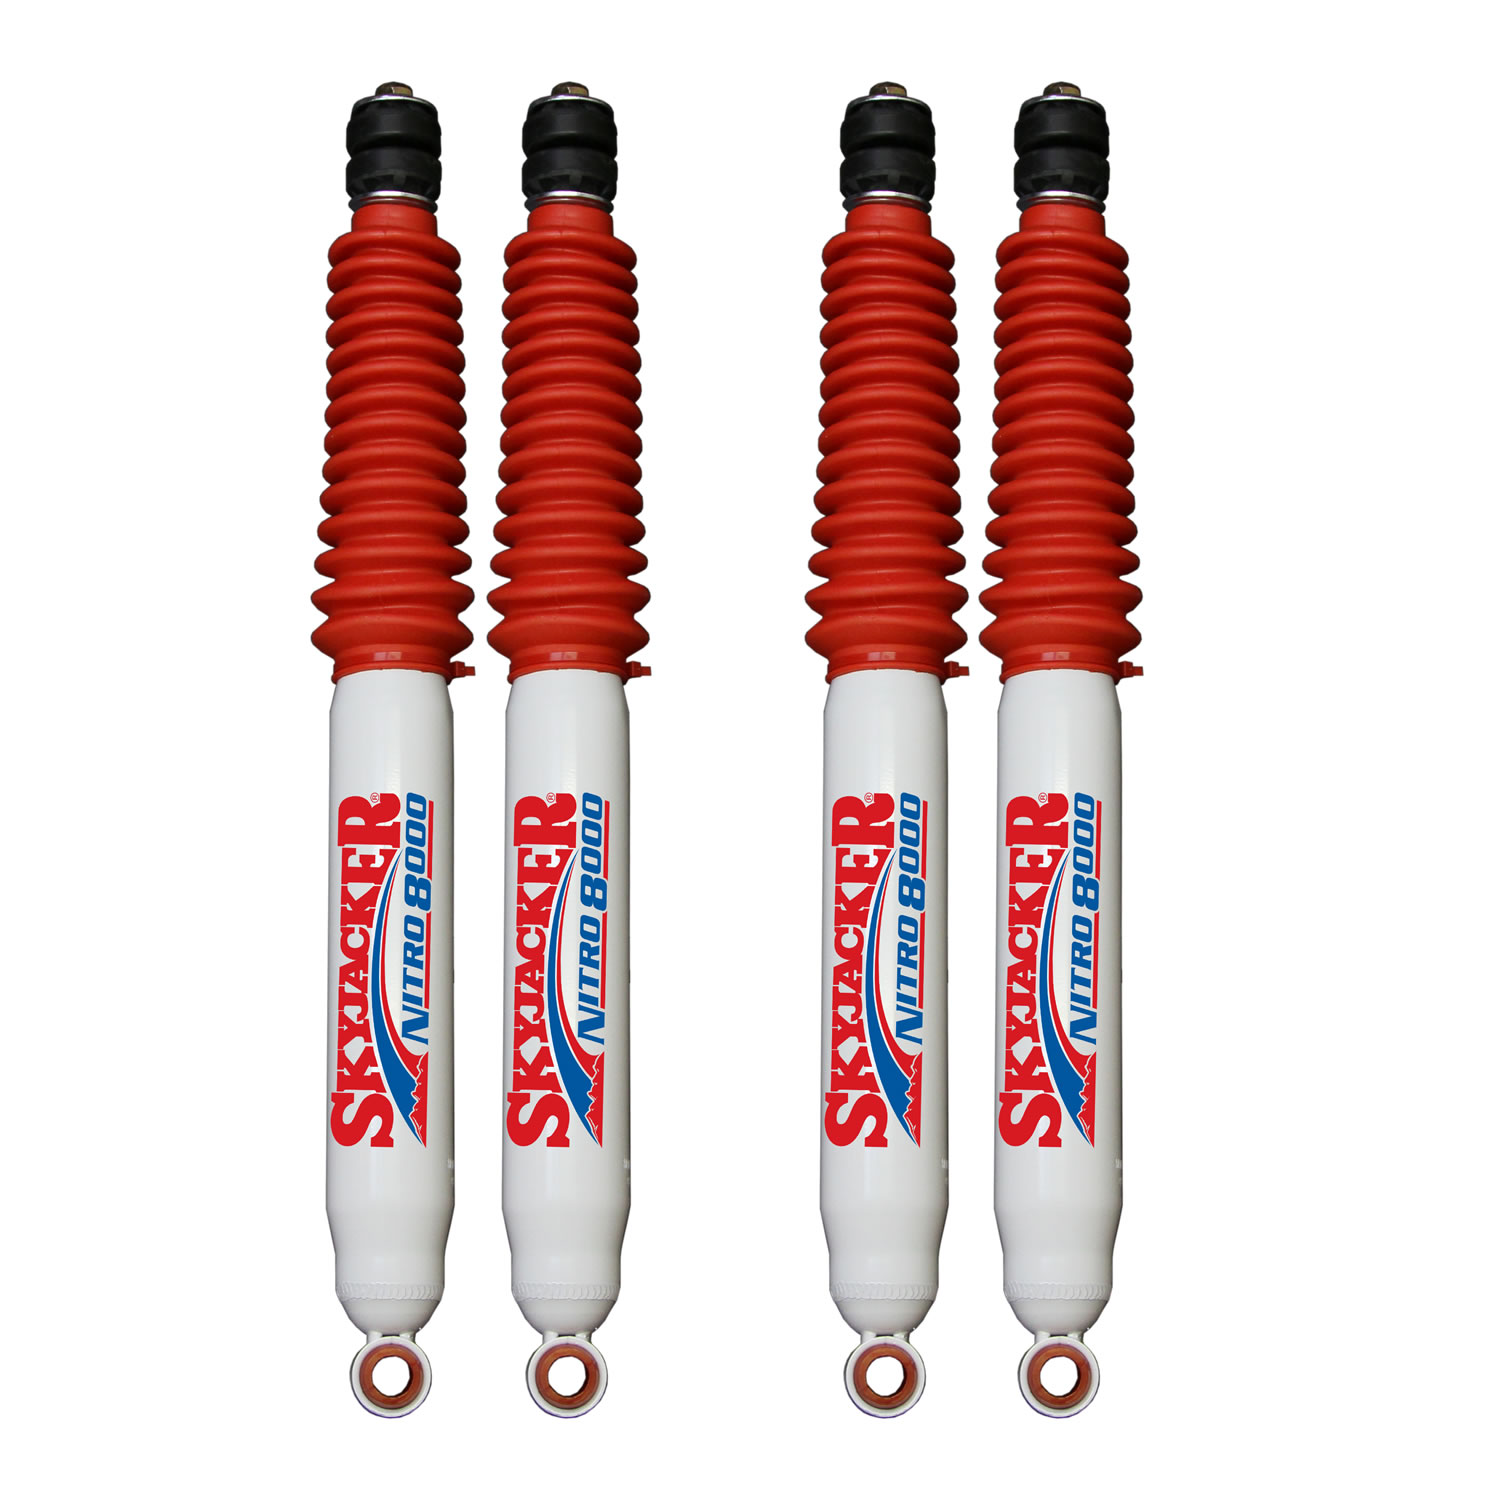 N8092-N8093 - Nitro 8000 Nitrogen Gas Charged Shocks with Red Boots